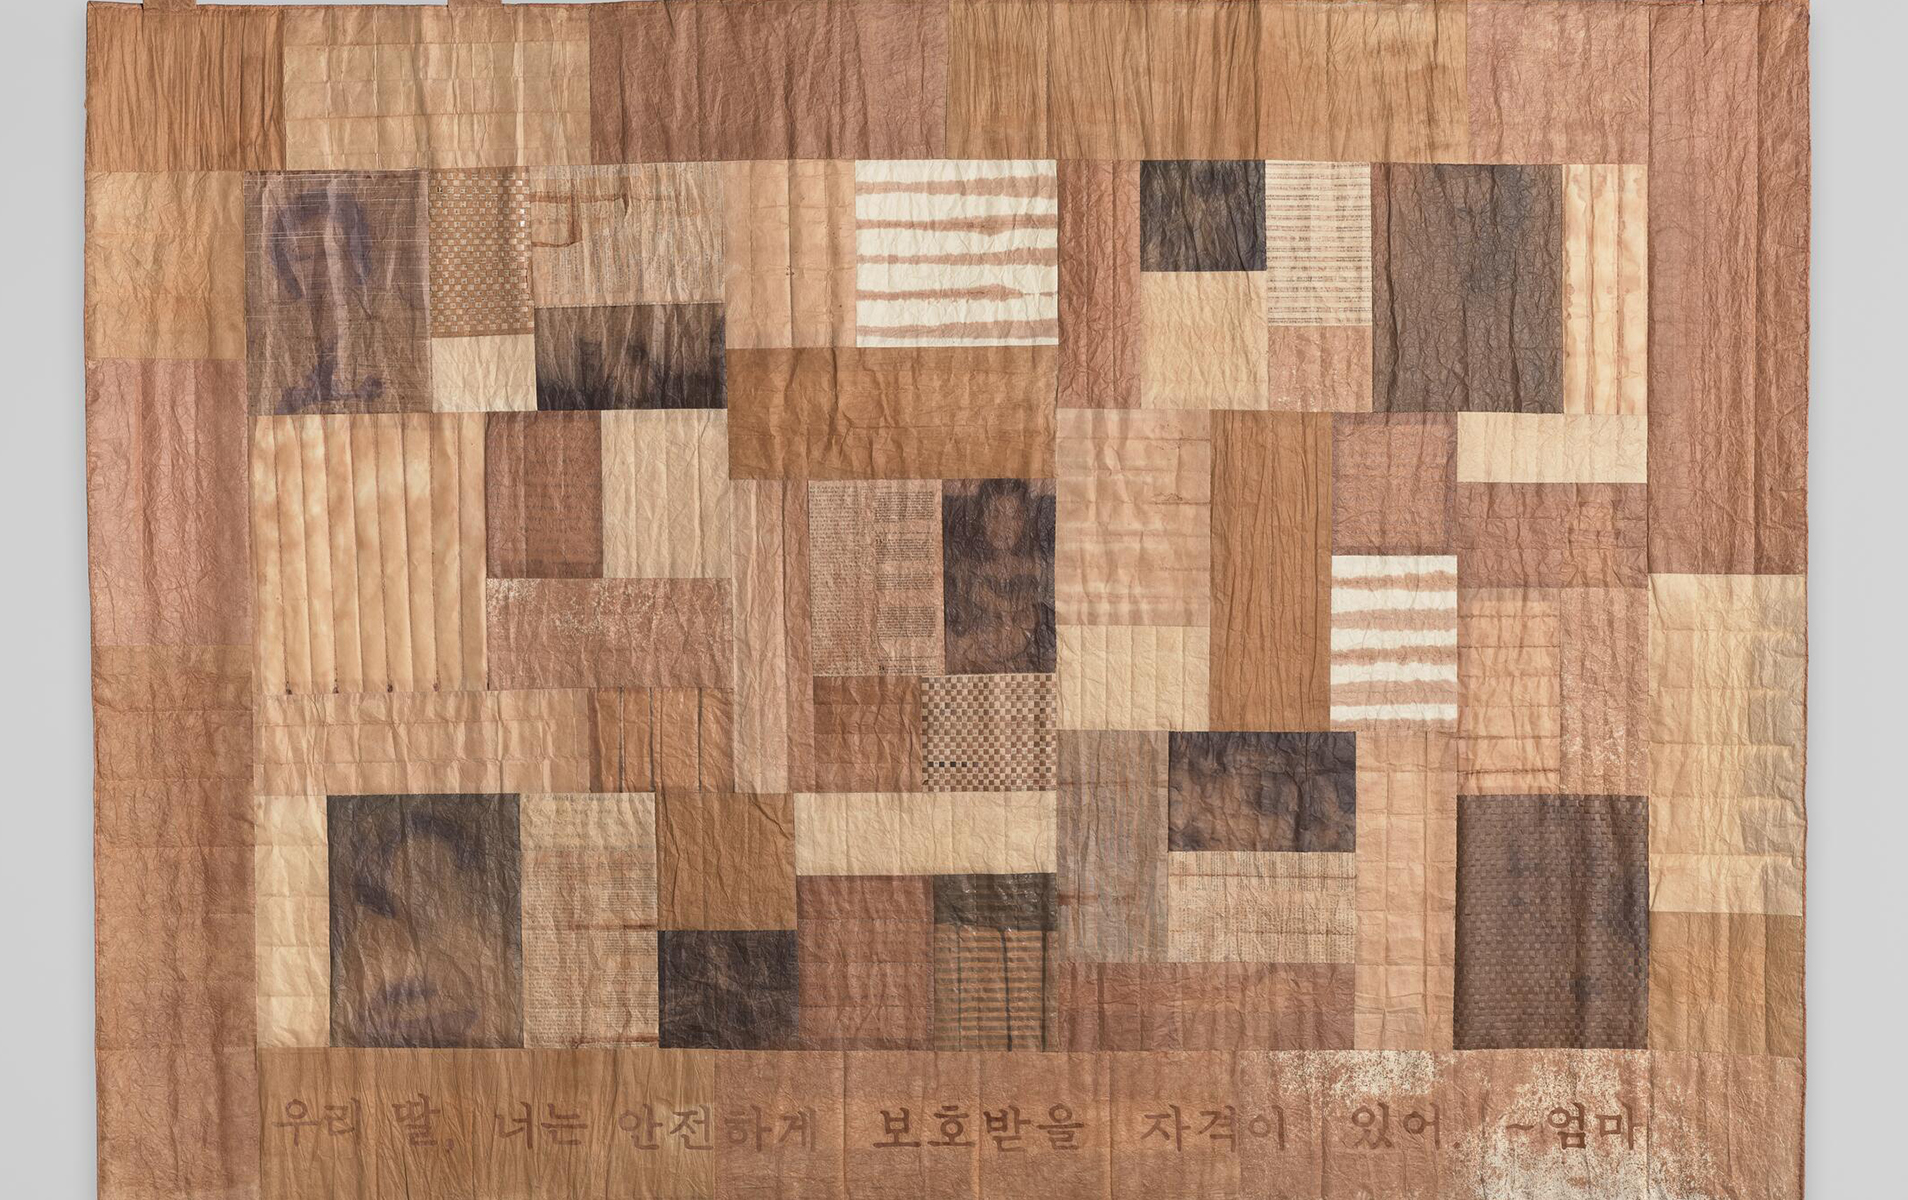 Patchwork artwork made of various shades of brown paper stitched together.